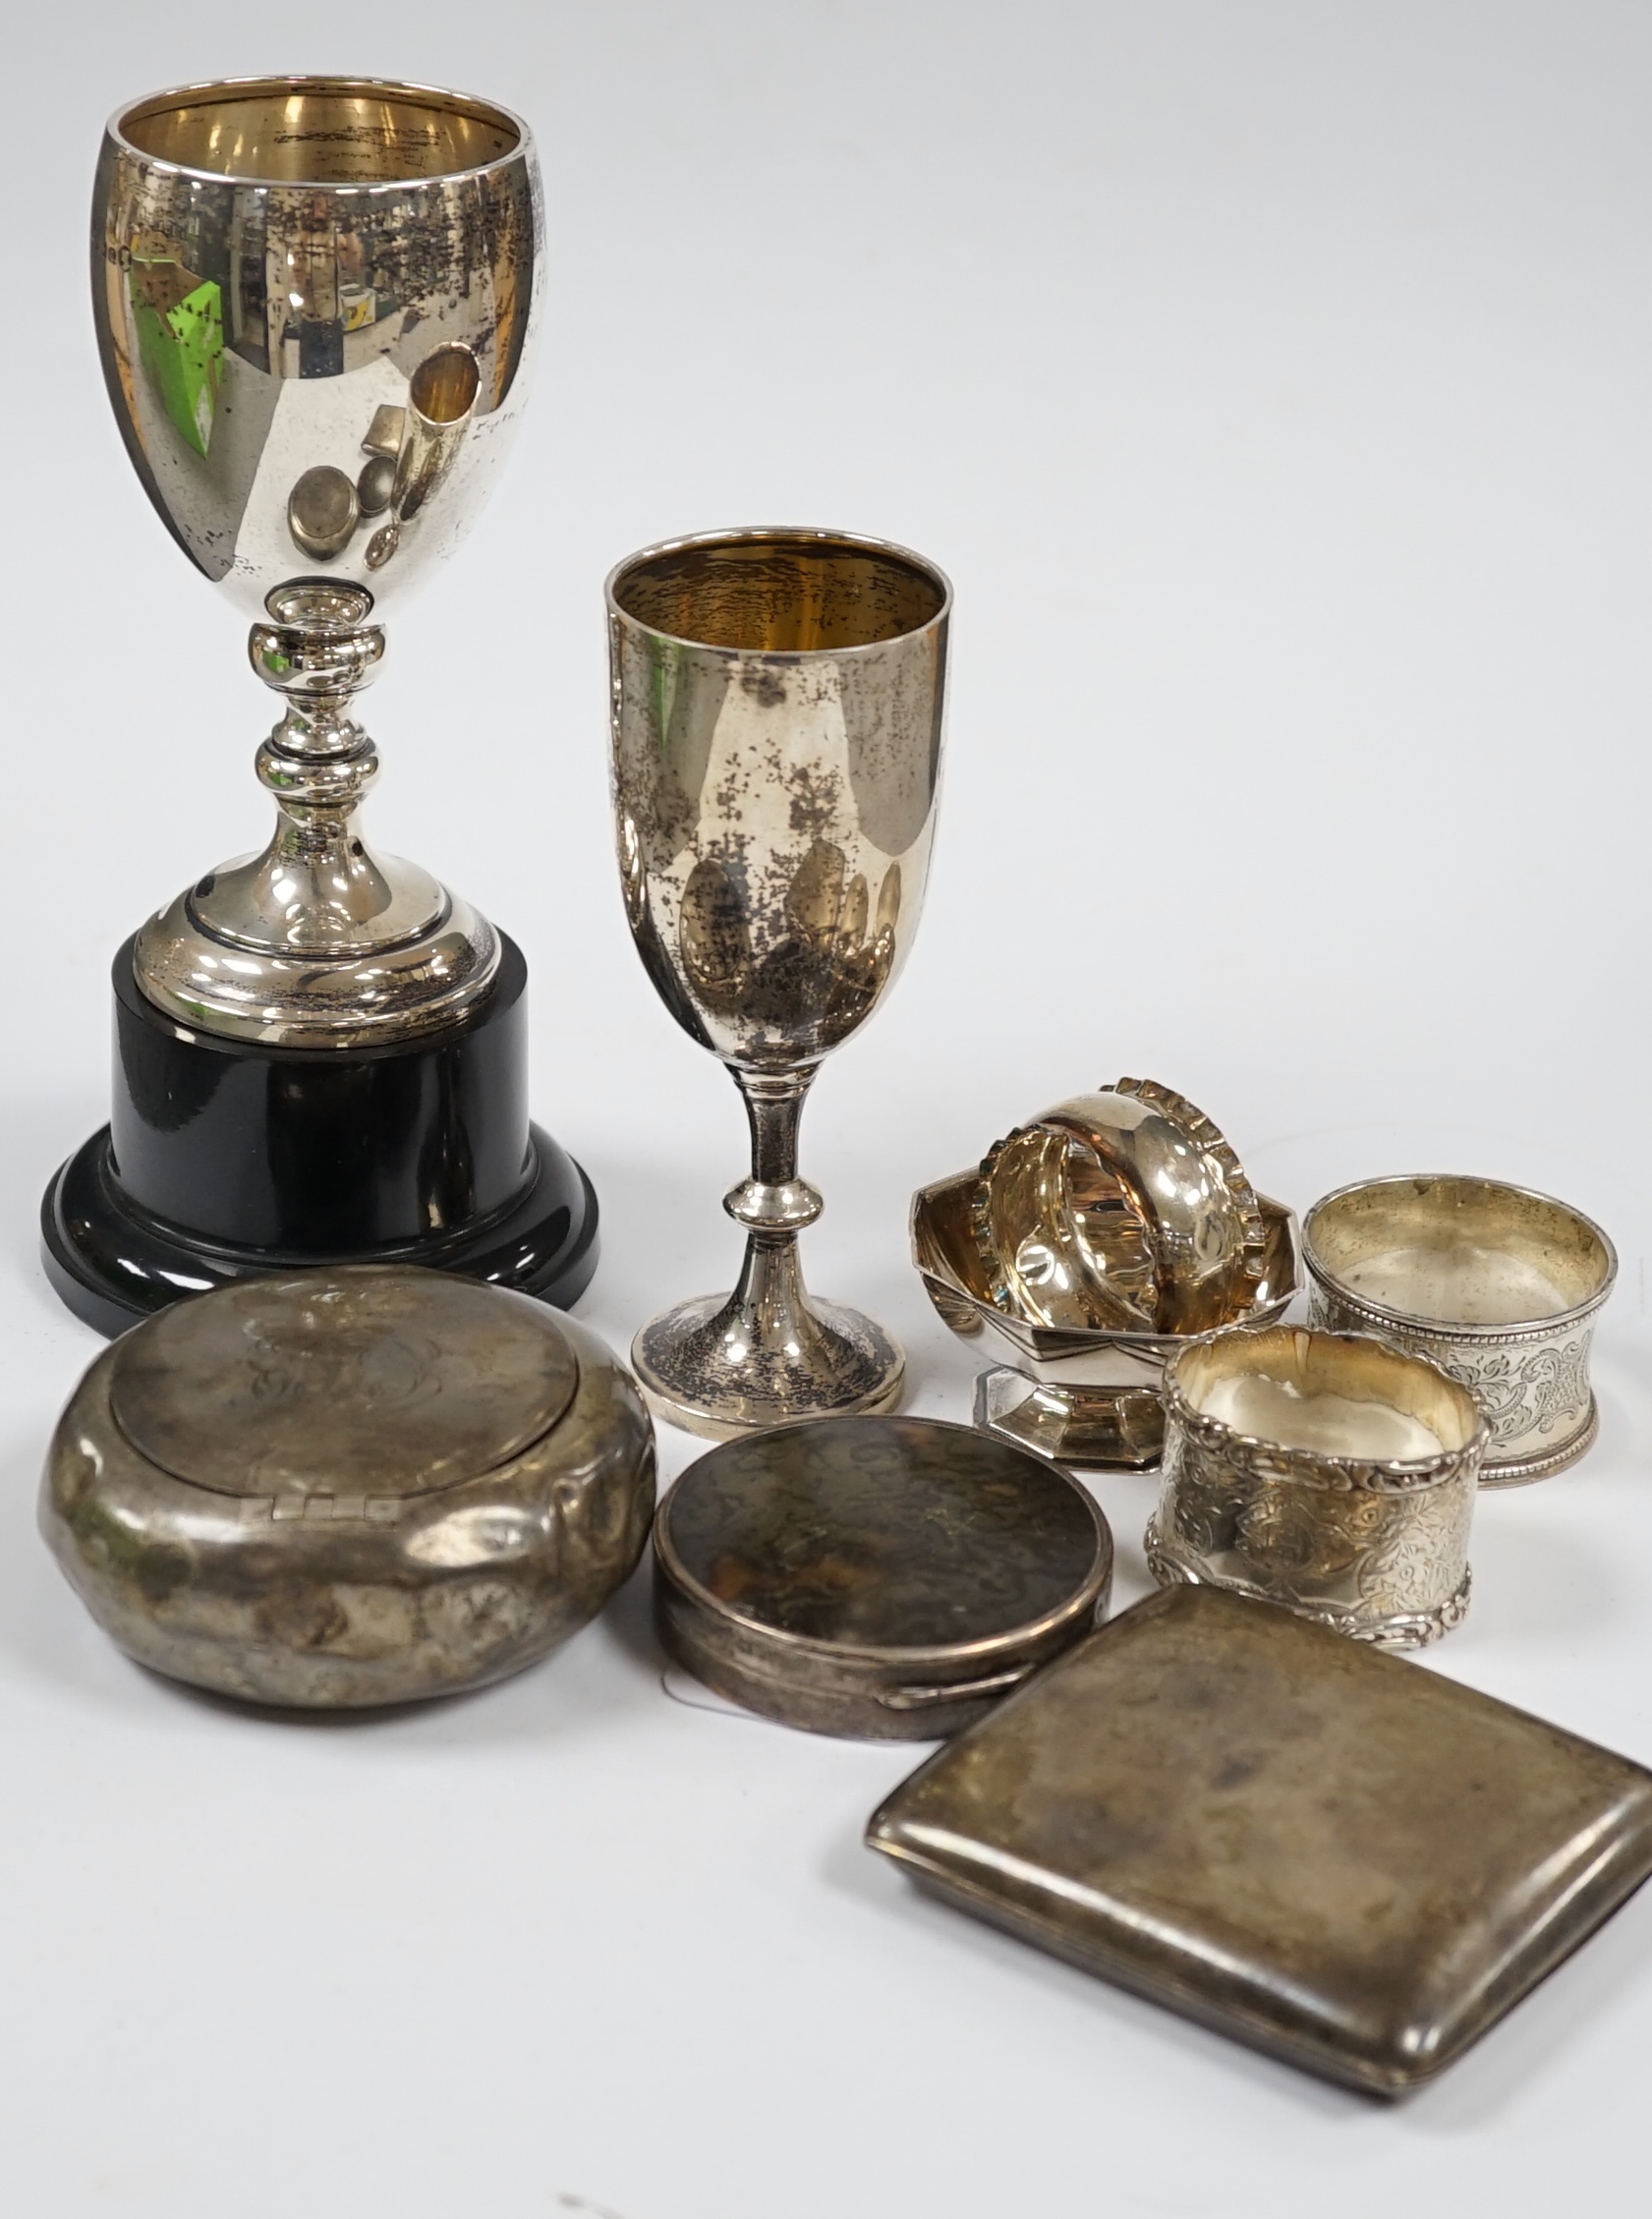 Sundry small silver including a tortoiseshell mounted compact, tobacco box (a.f.), two small trophy cups, napkin rings, condiment etc. and a Sampson Mordan & Co. yellow metal overlaid propelling pencil. Condition - poor